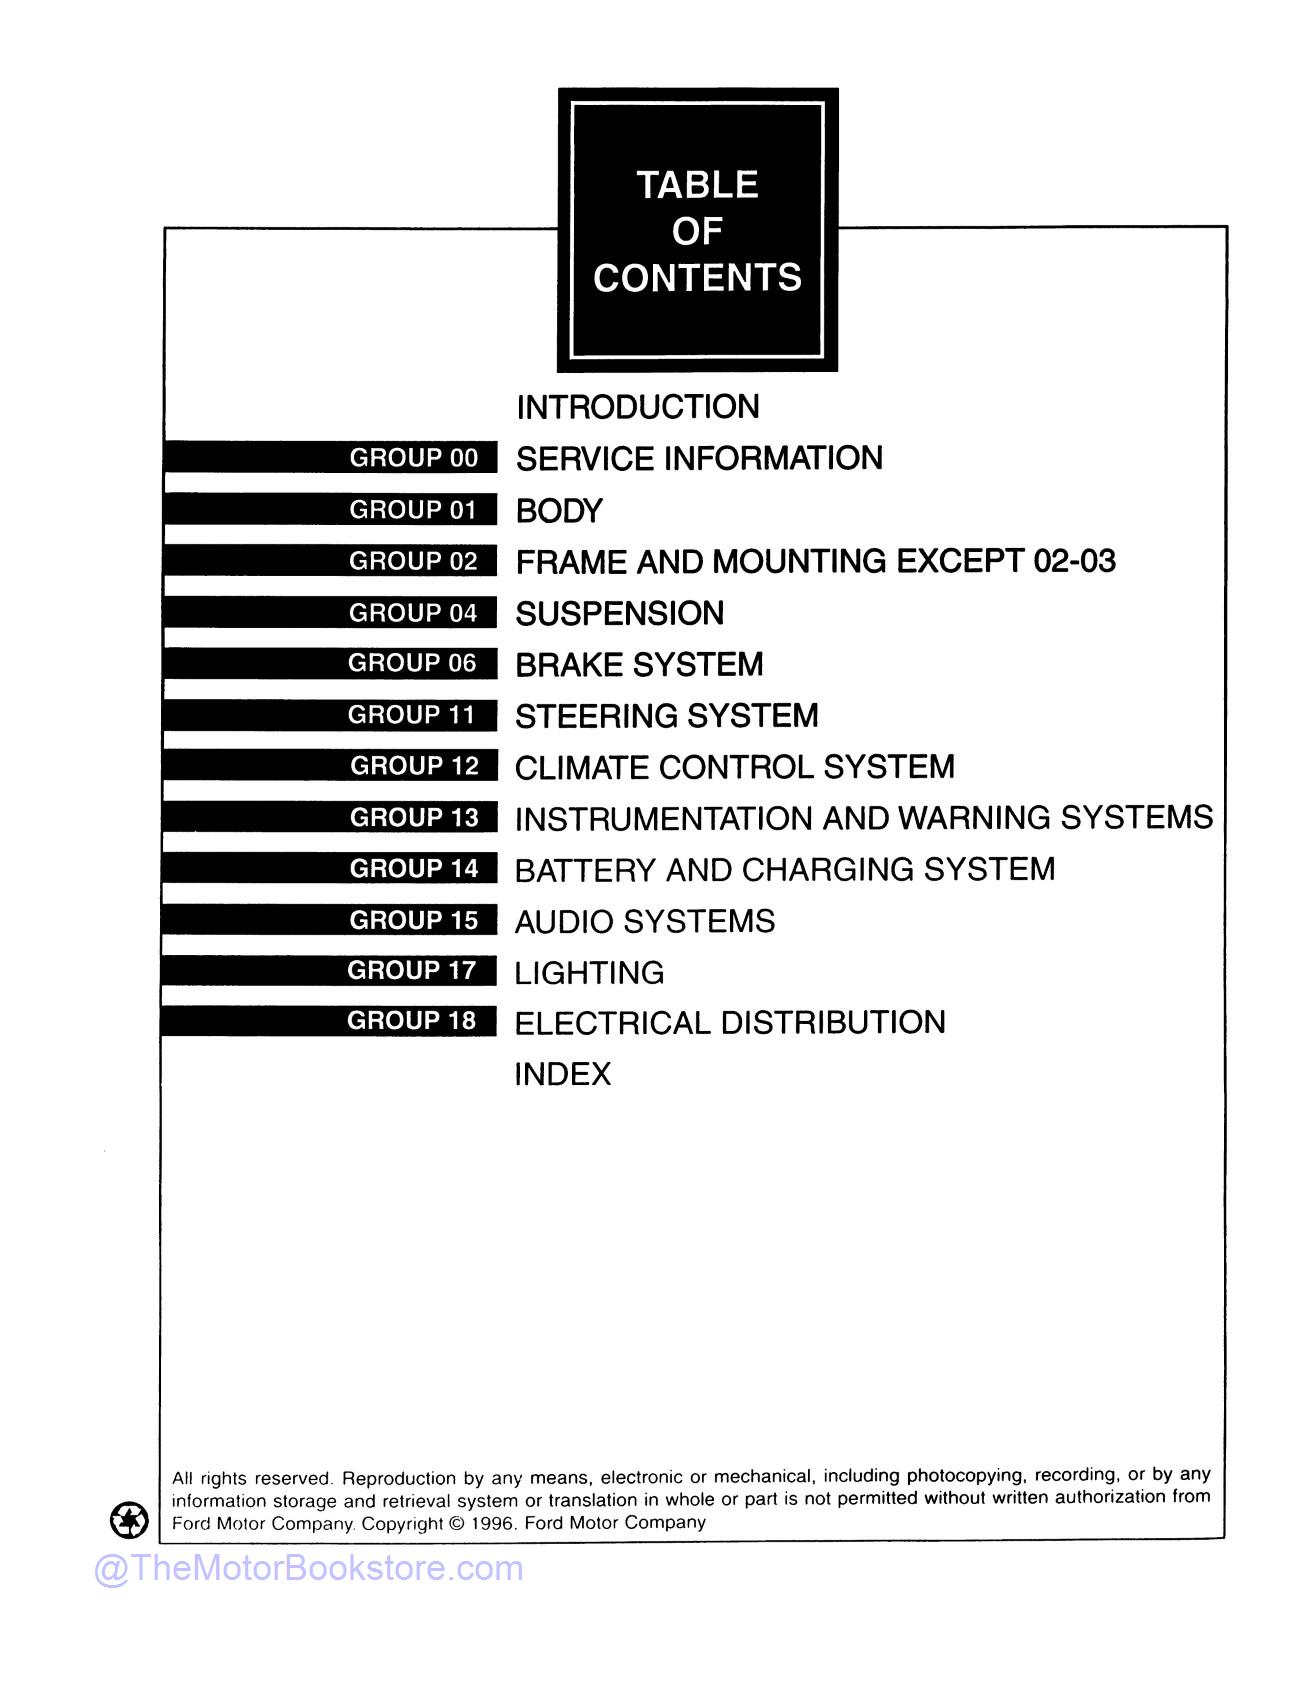 1997 Ford Ranger, Aerostar Service Manual  - Table of Contents 1